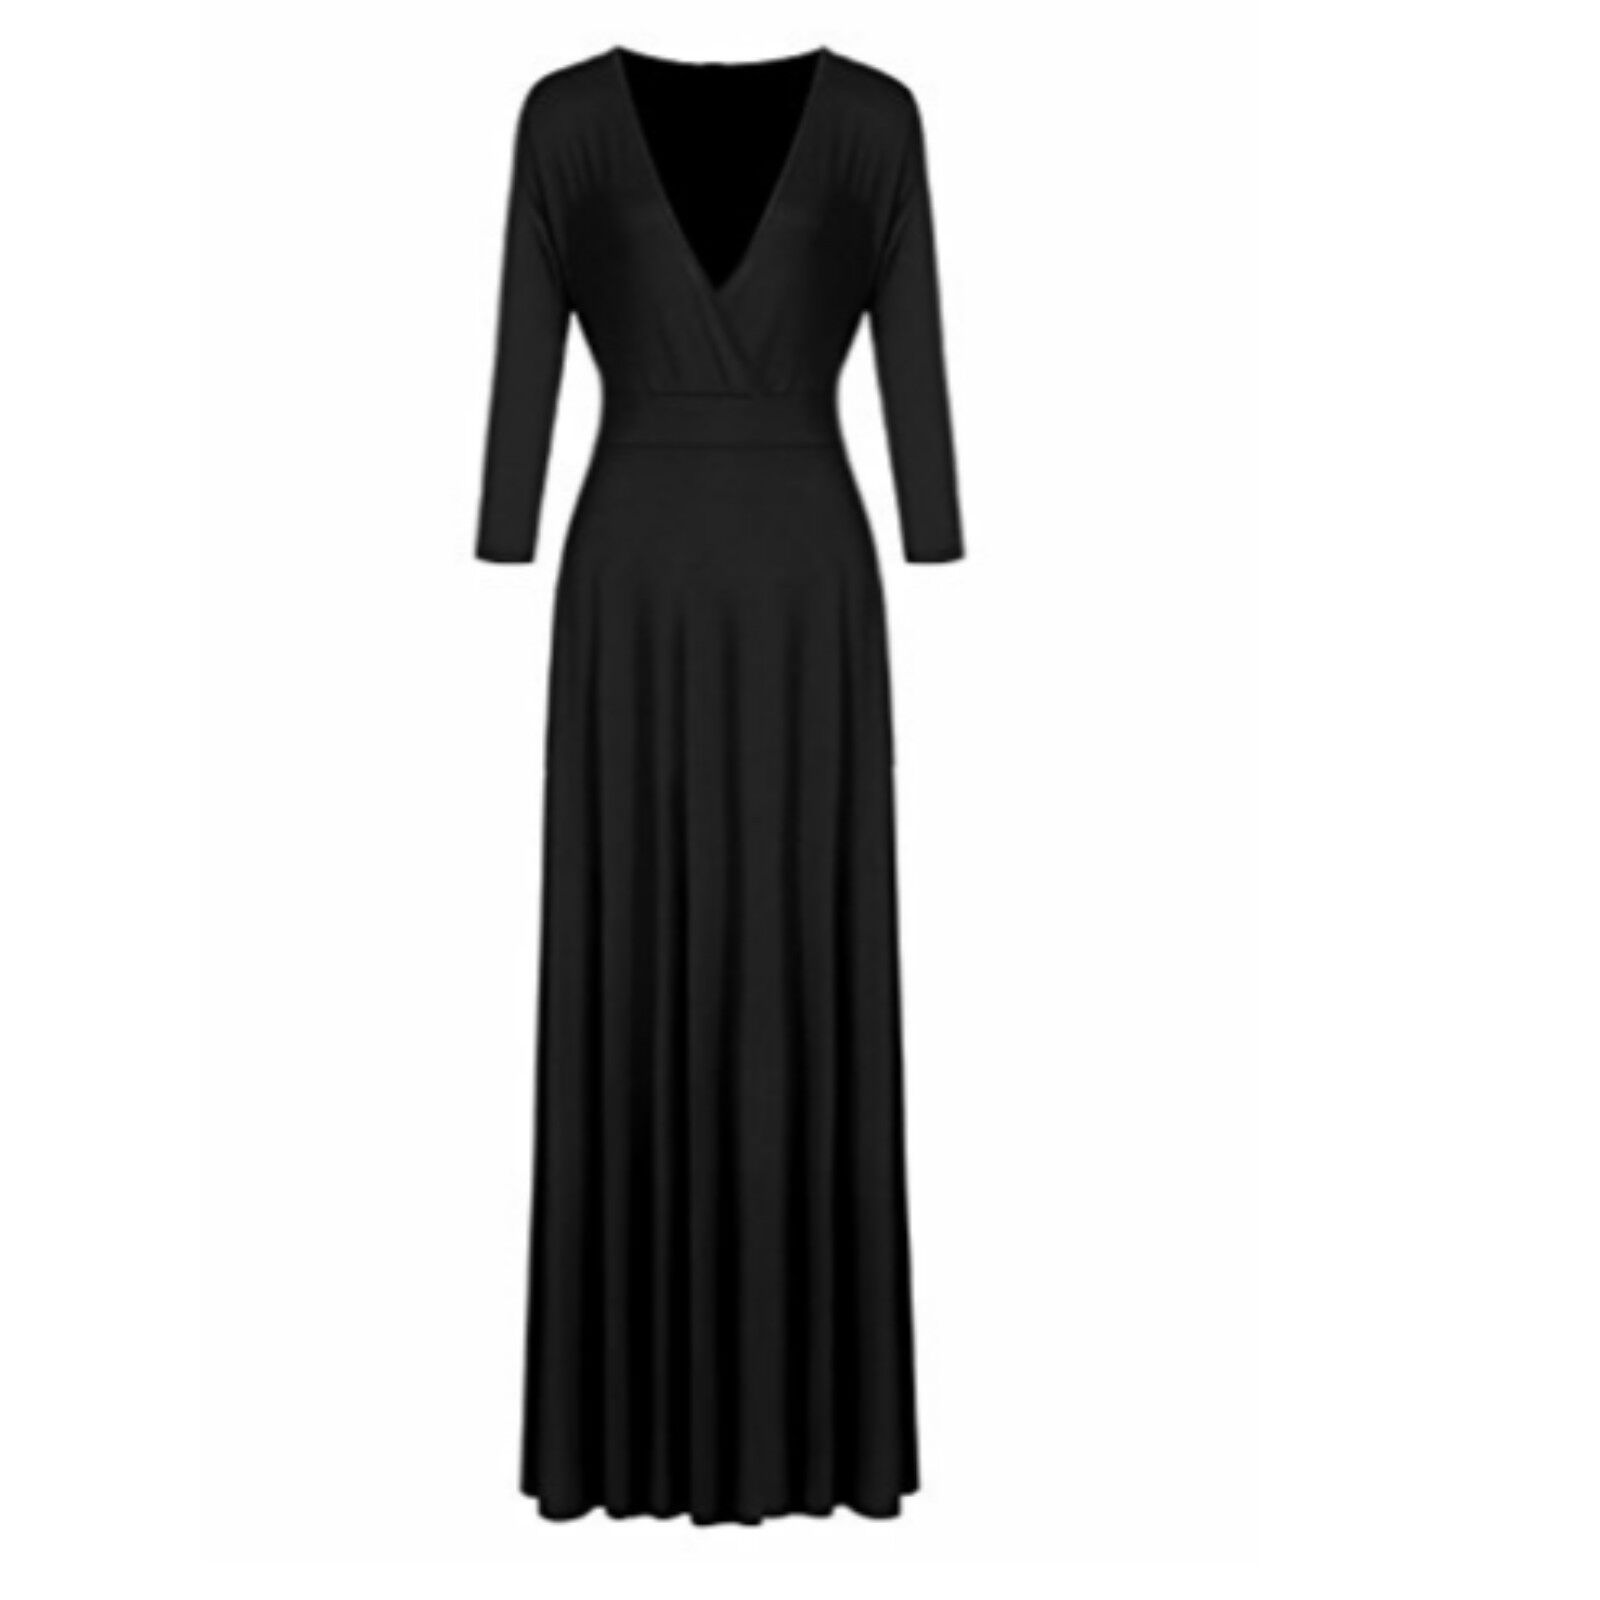 Women Dress For Party Evening Cocktail Long Maxi Dress V Neck 3/4 Sleeve 